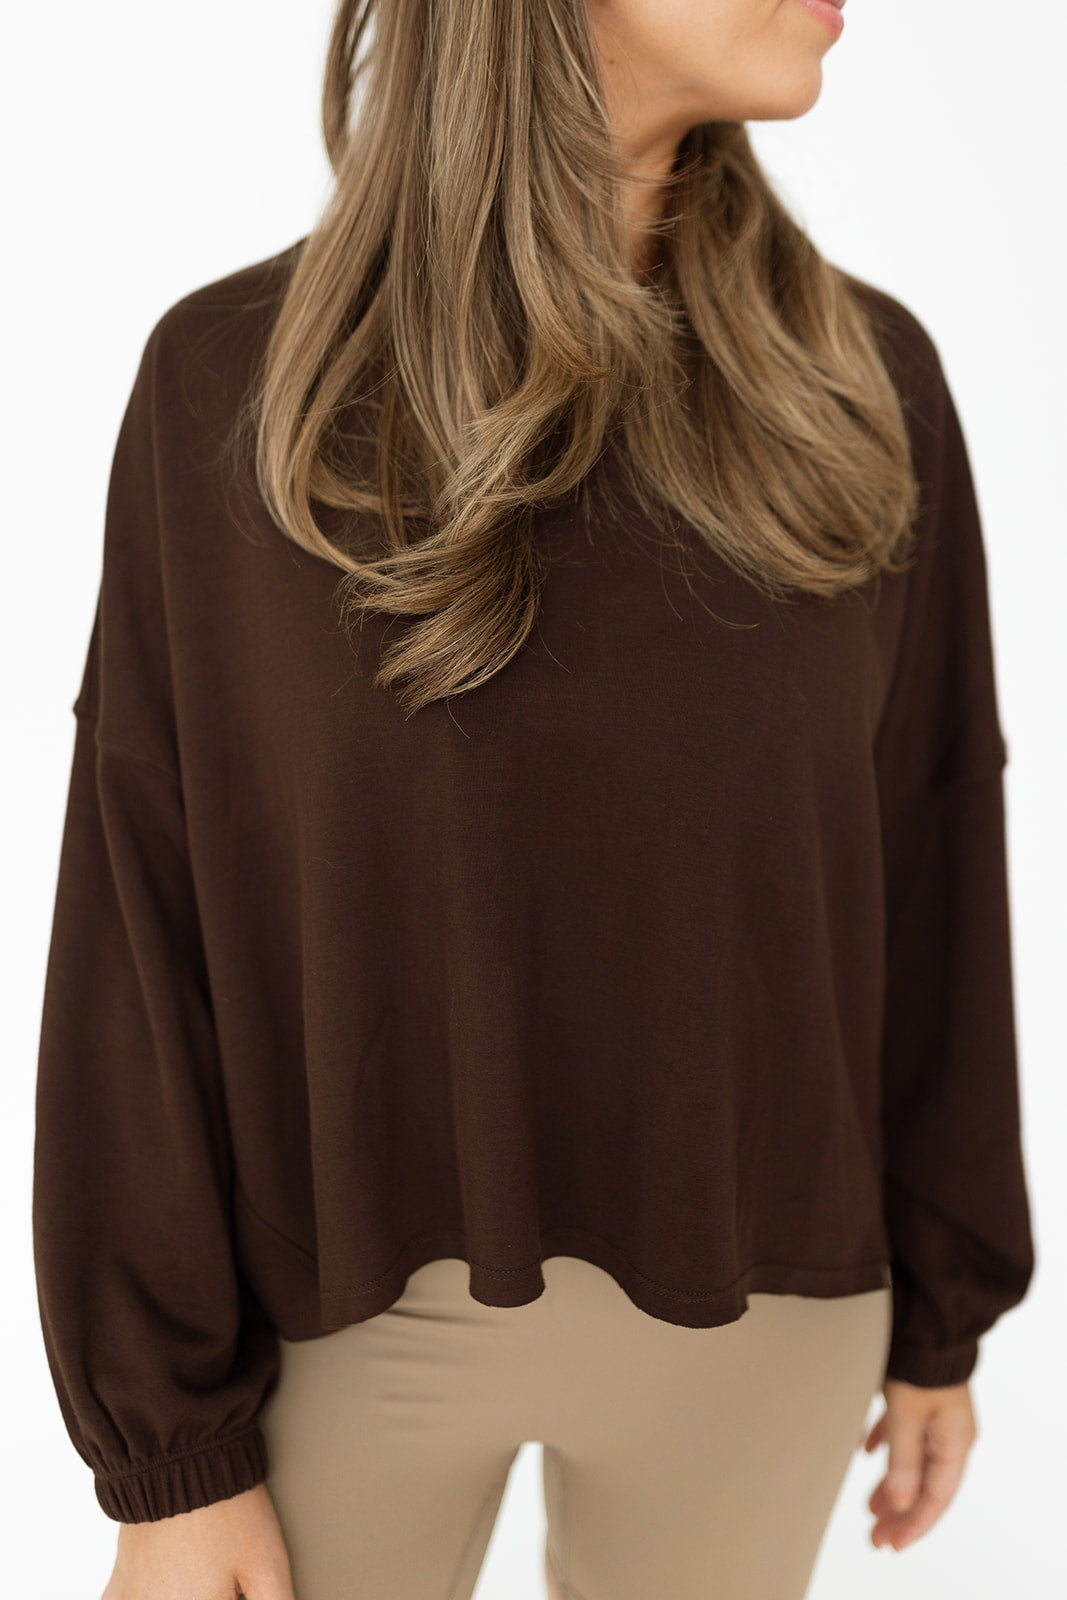 Cocoa Brown Comfy Pullover Cozy and Cute 